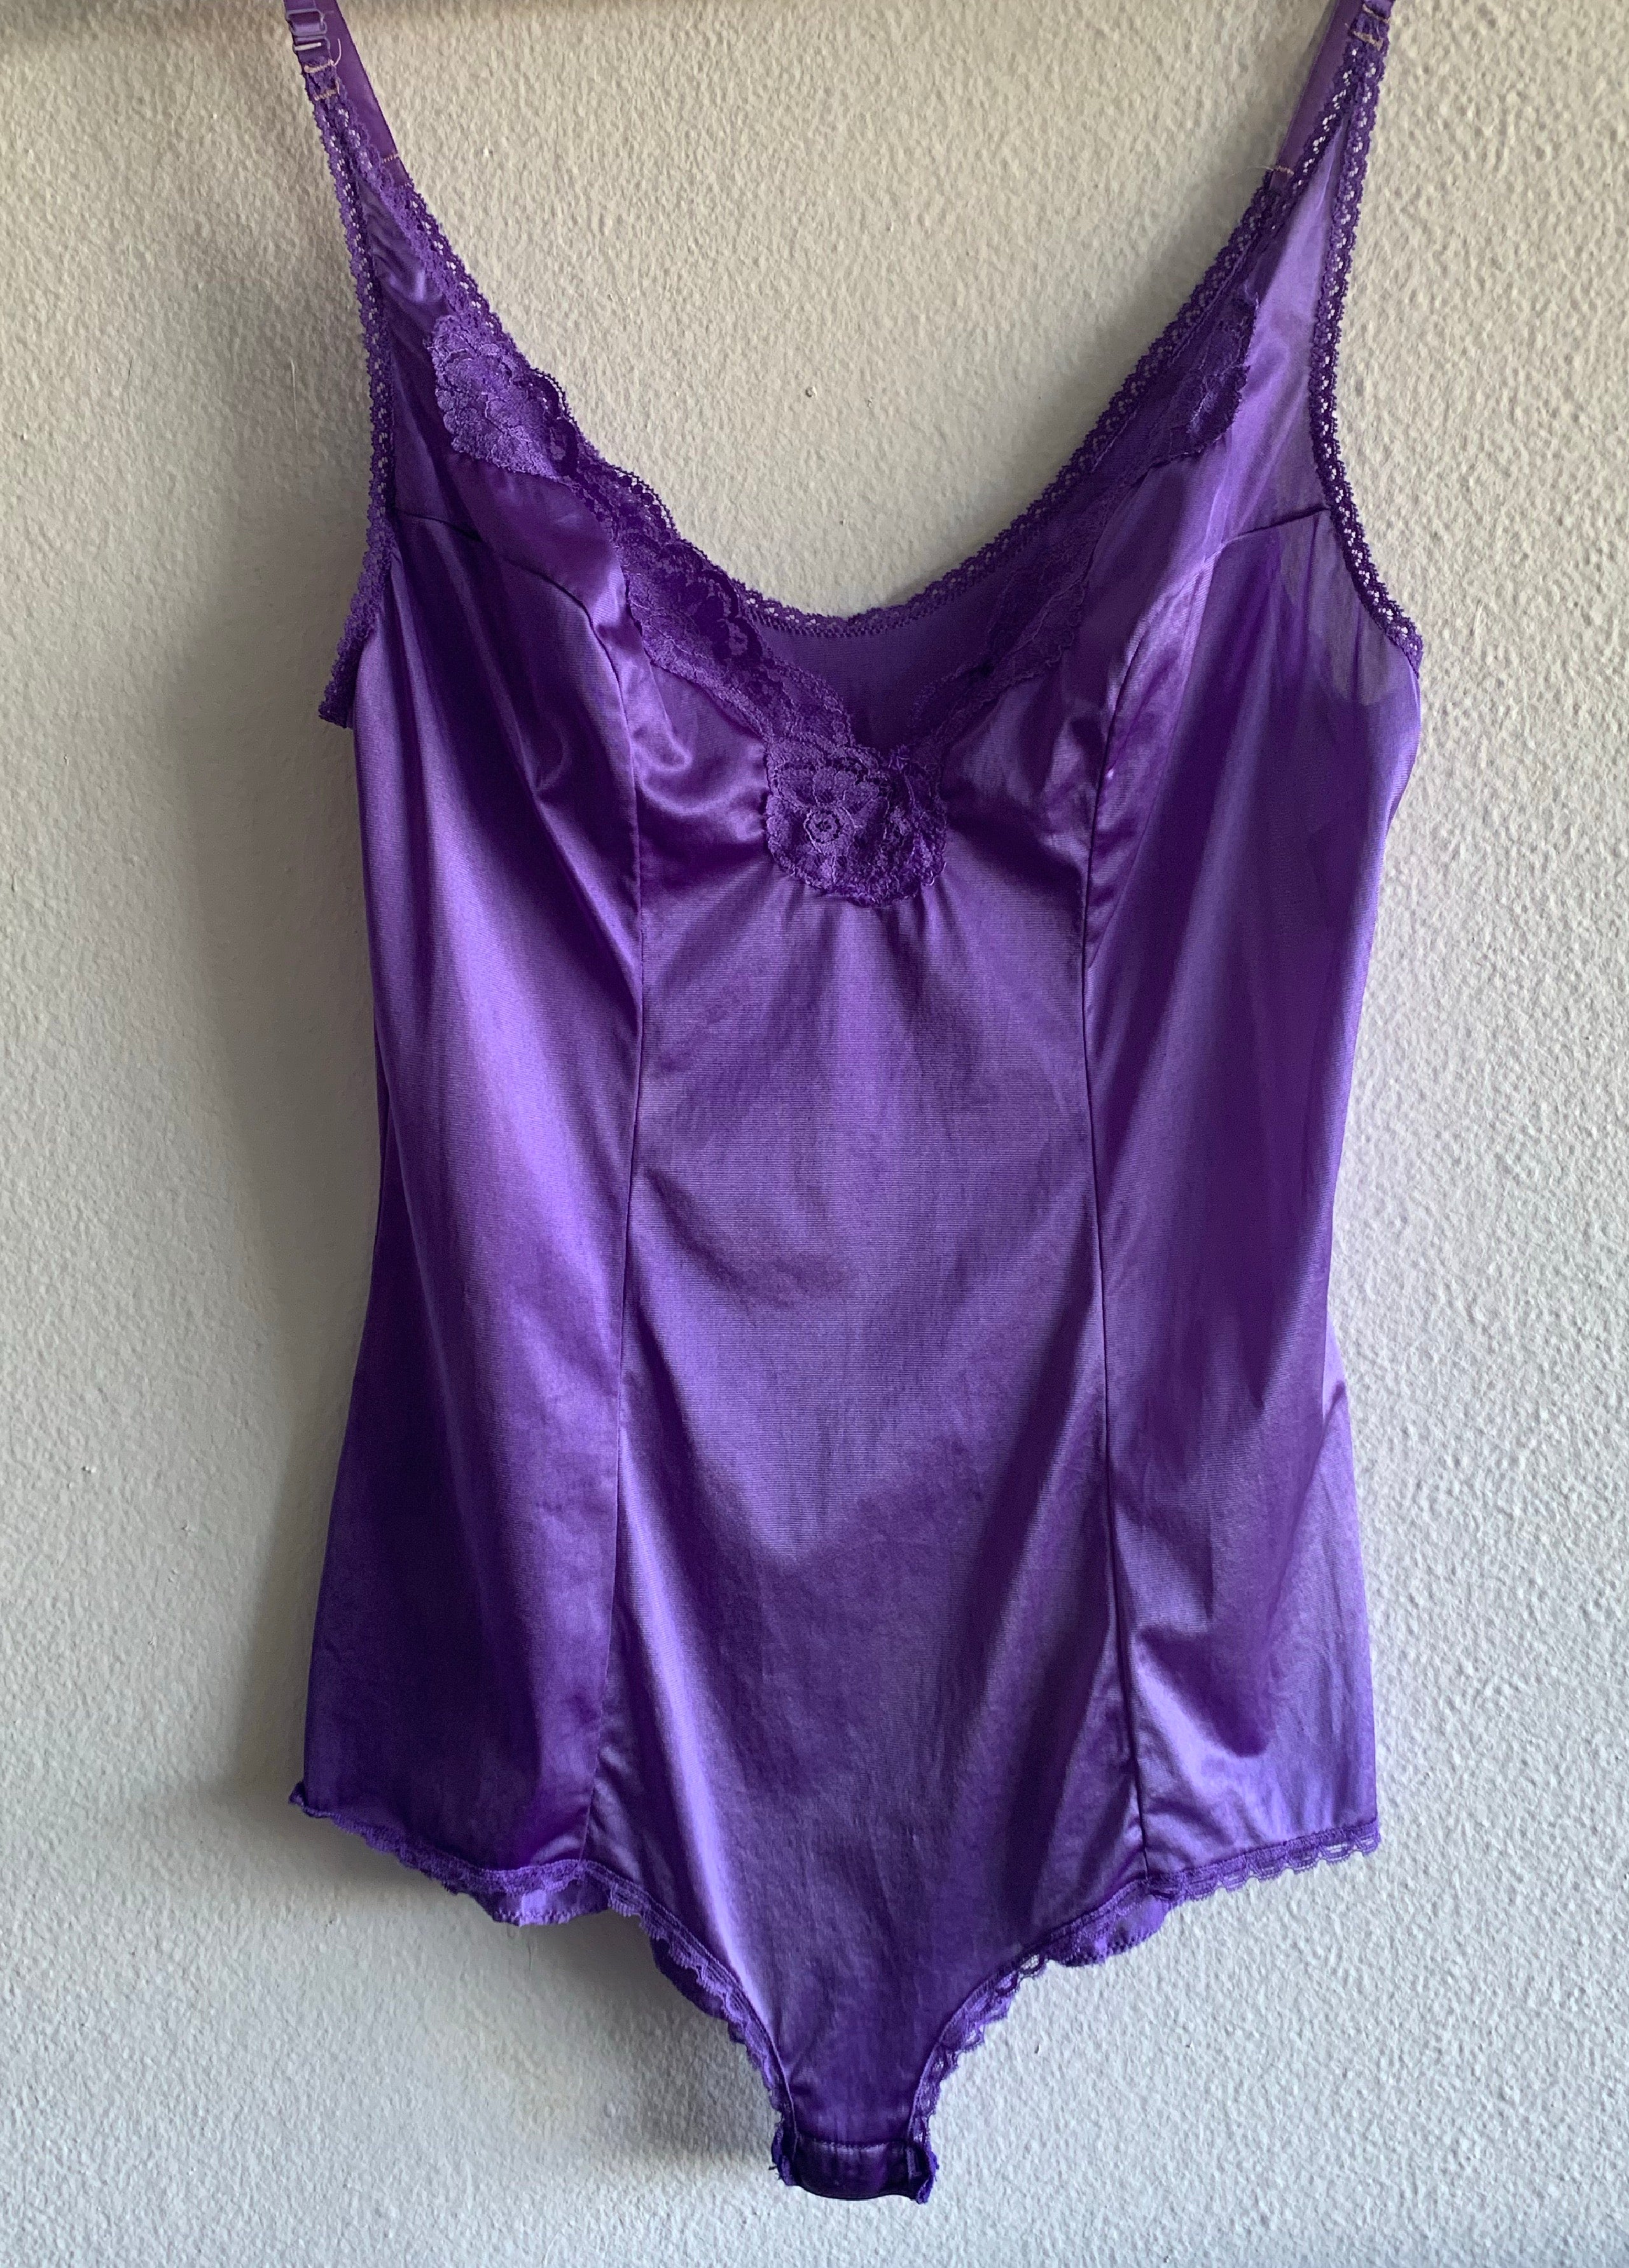 Violet Hand-Dyed Teddy Romper